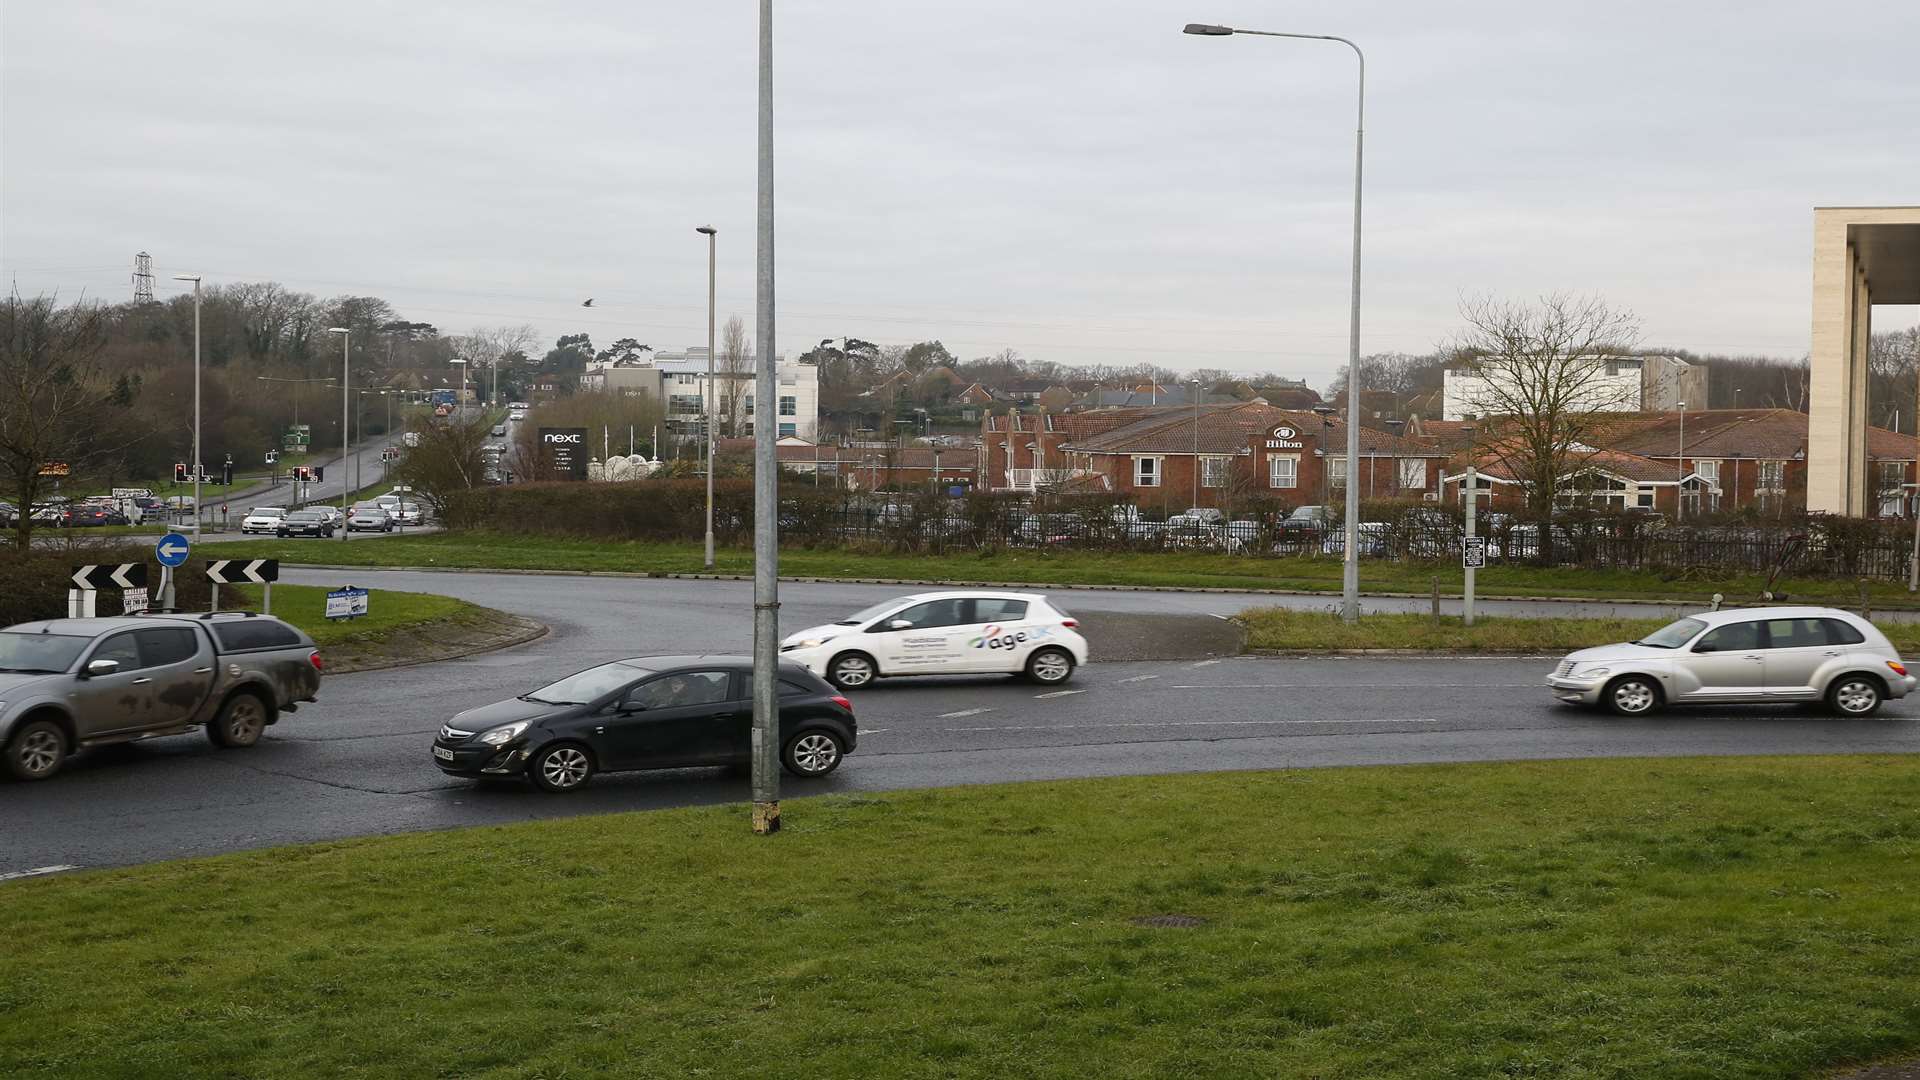 The Nocutts roundabout at Bearsted Road could be upgraded